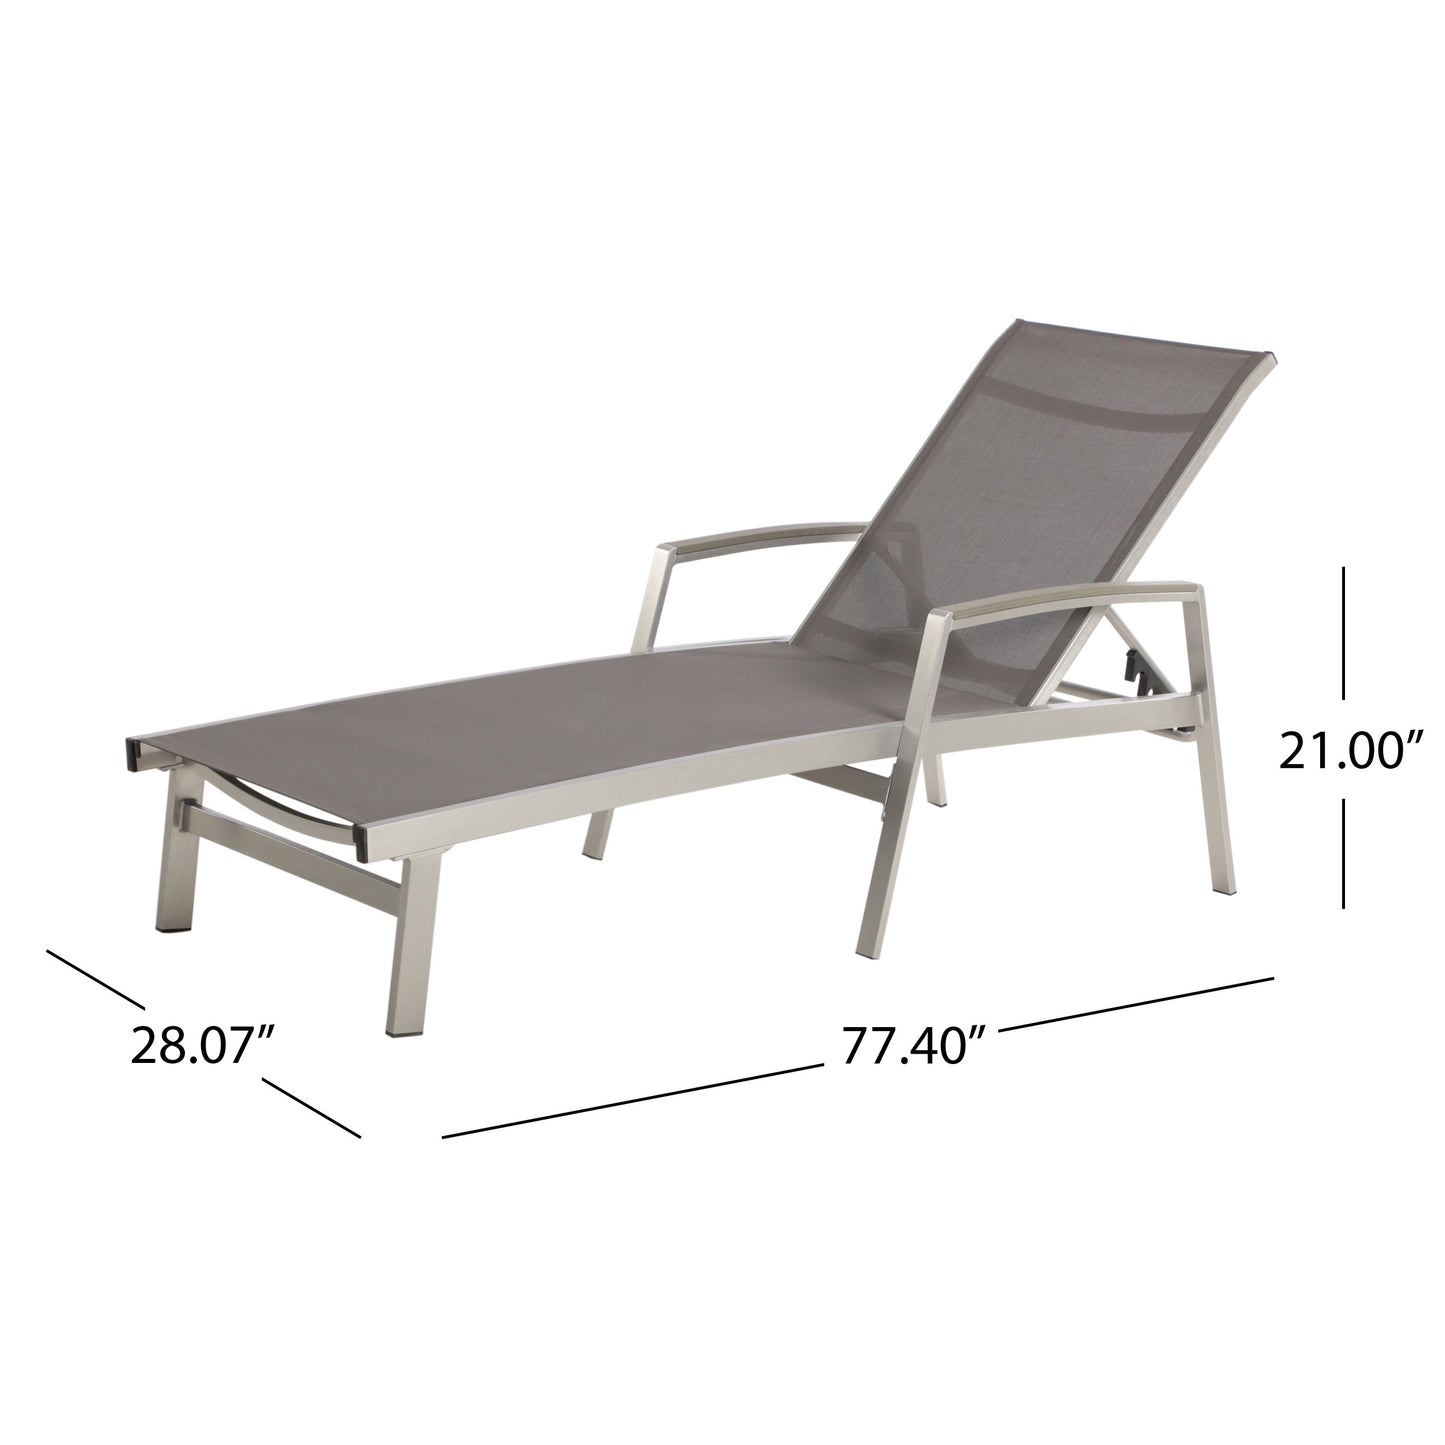 Joy Outdoor Mesh and Aluminum Chaise Lounge